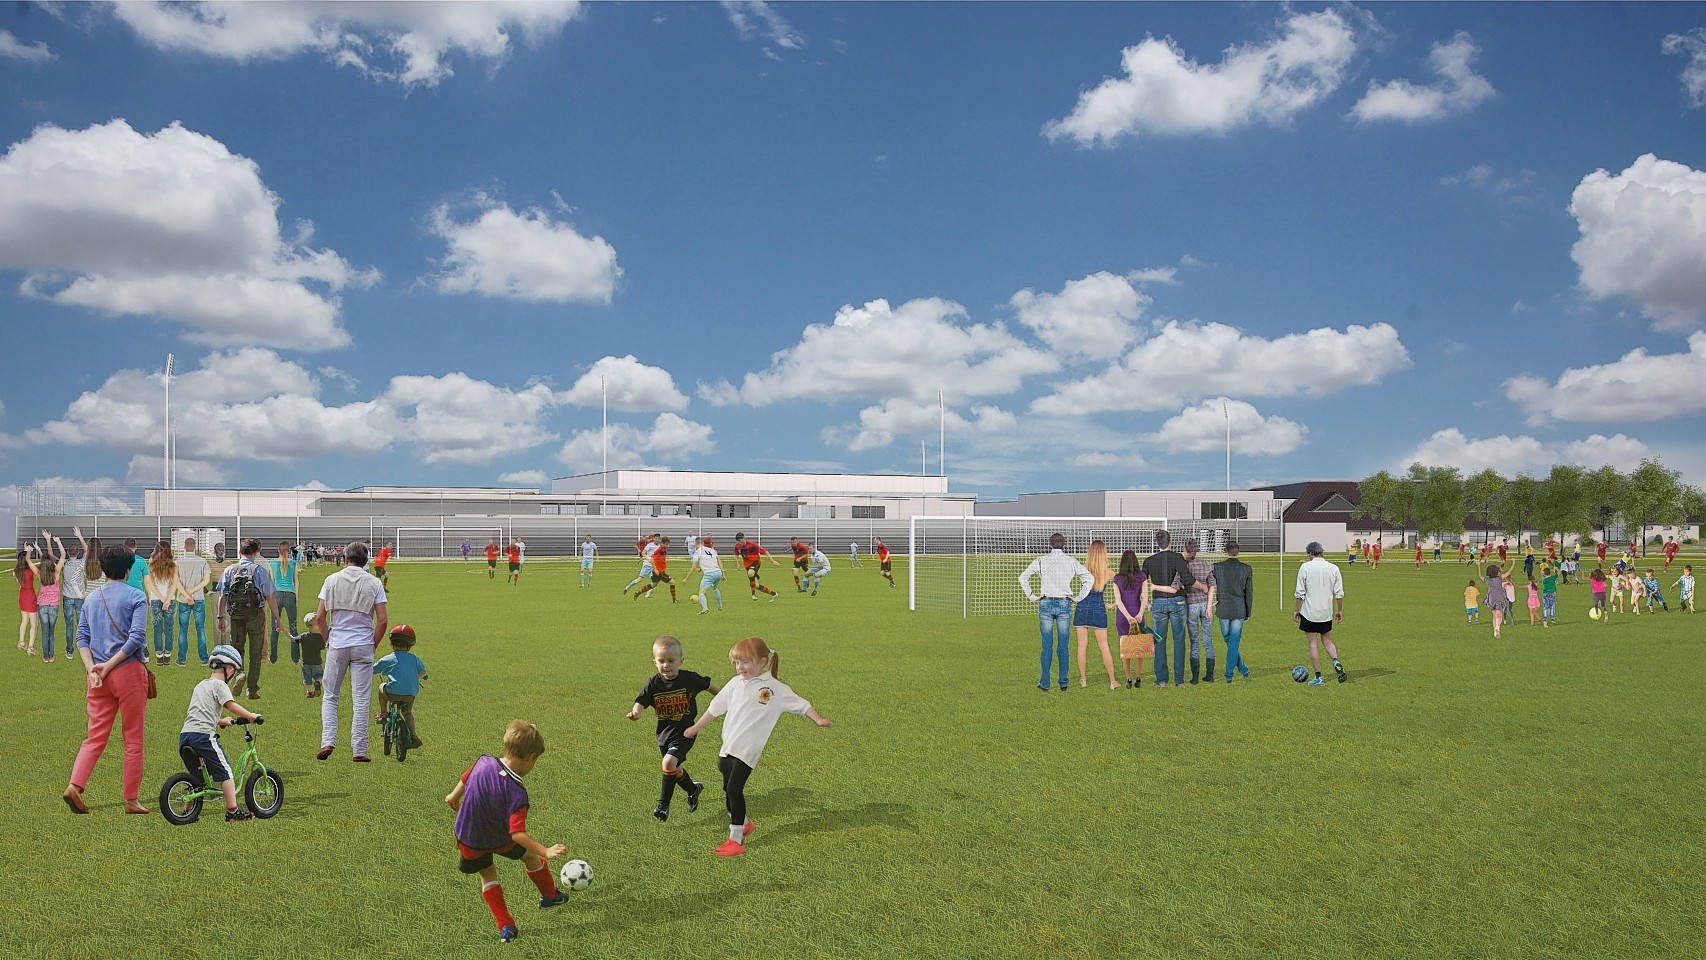 Outdoor facilities at the proposed Garioch Sports and Community Centre